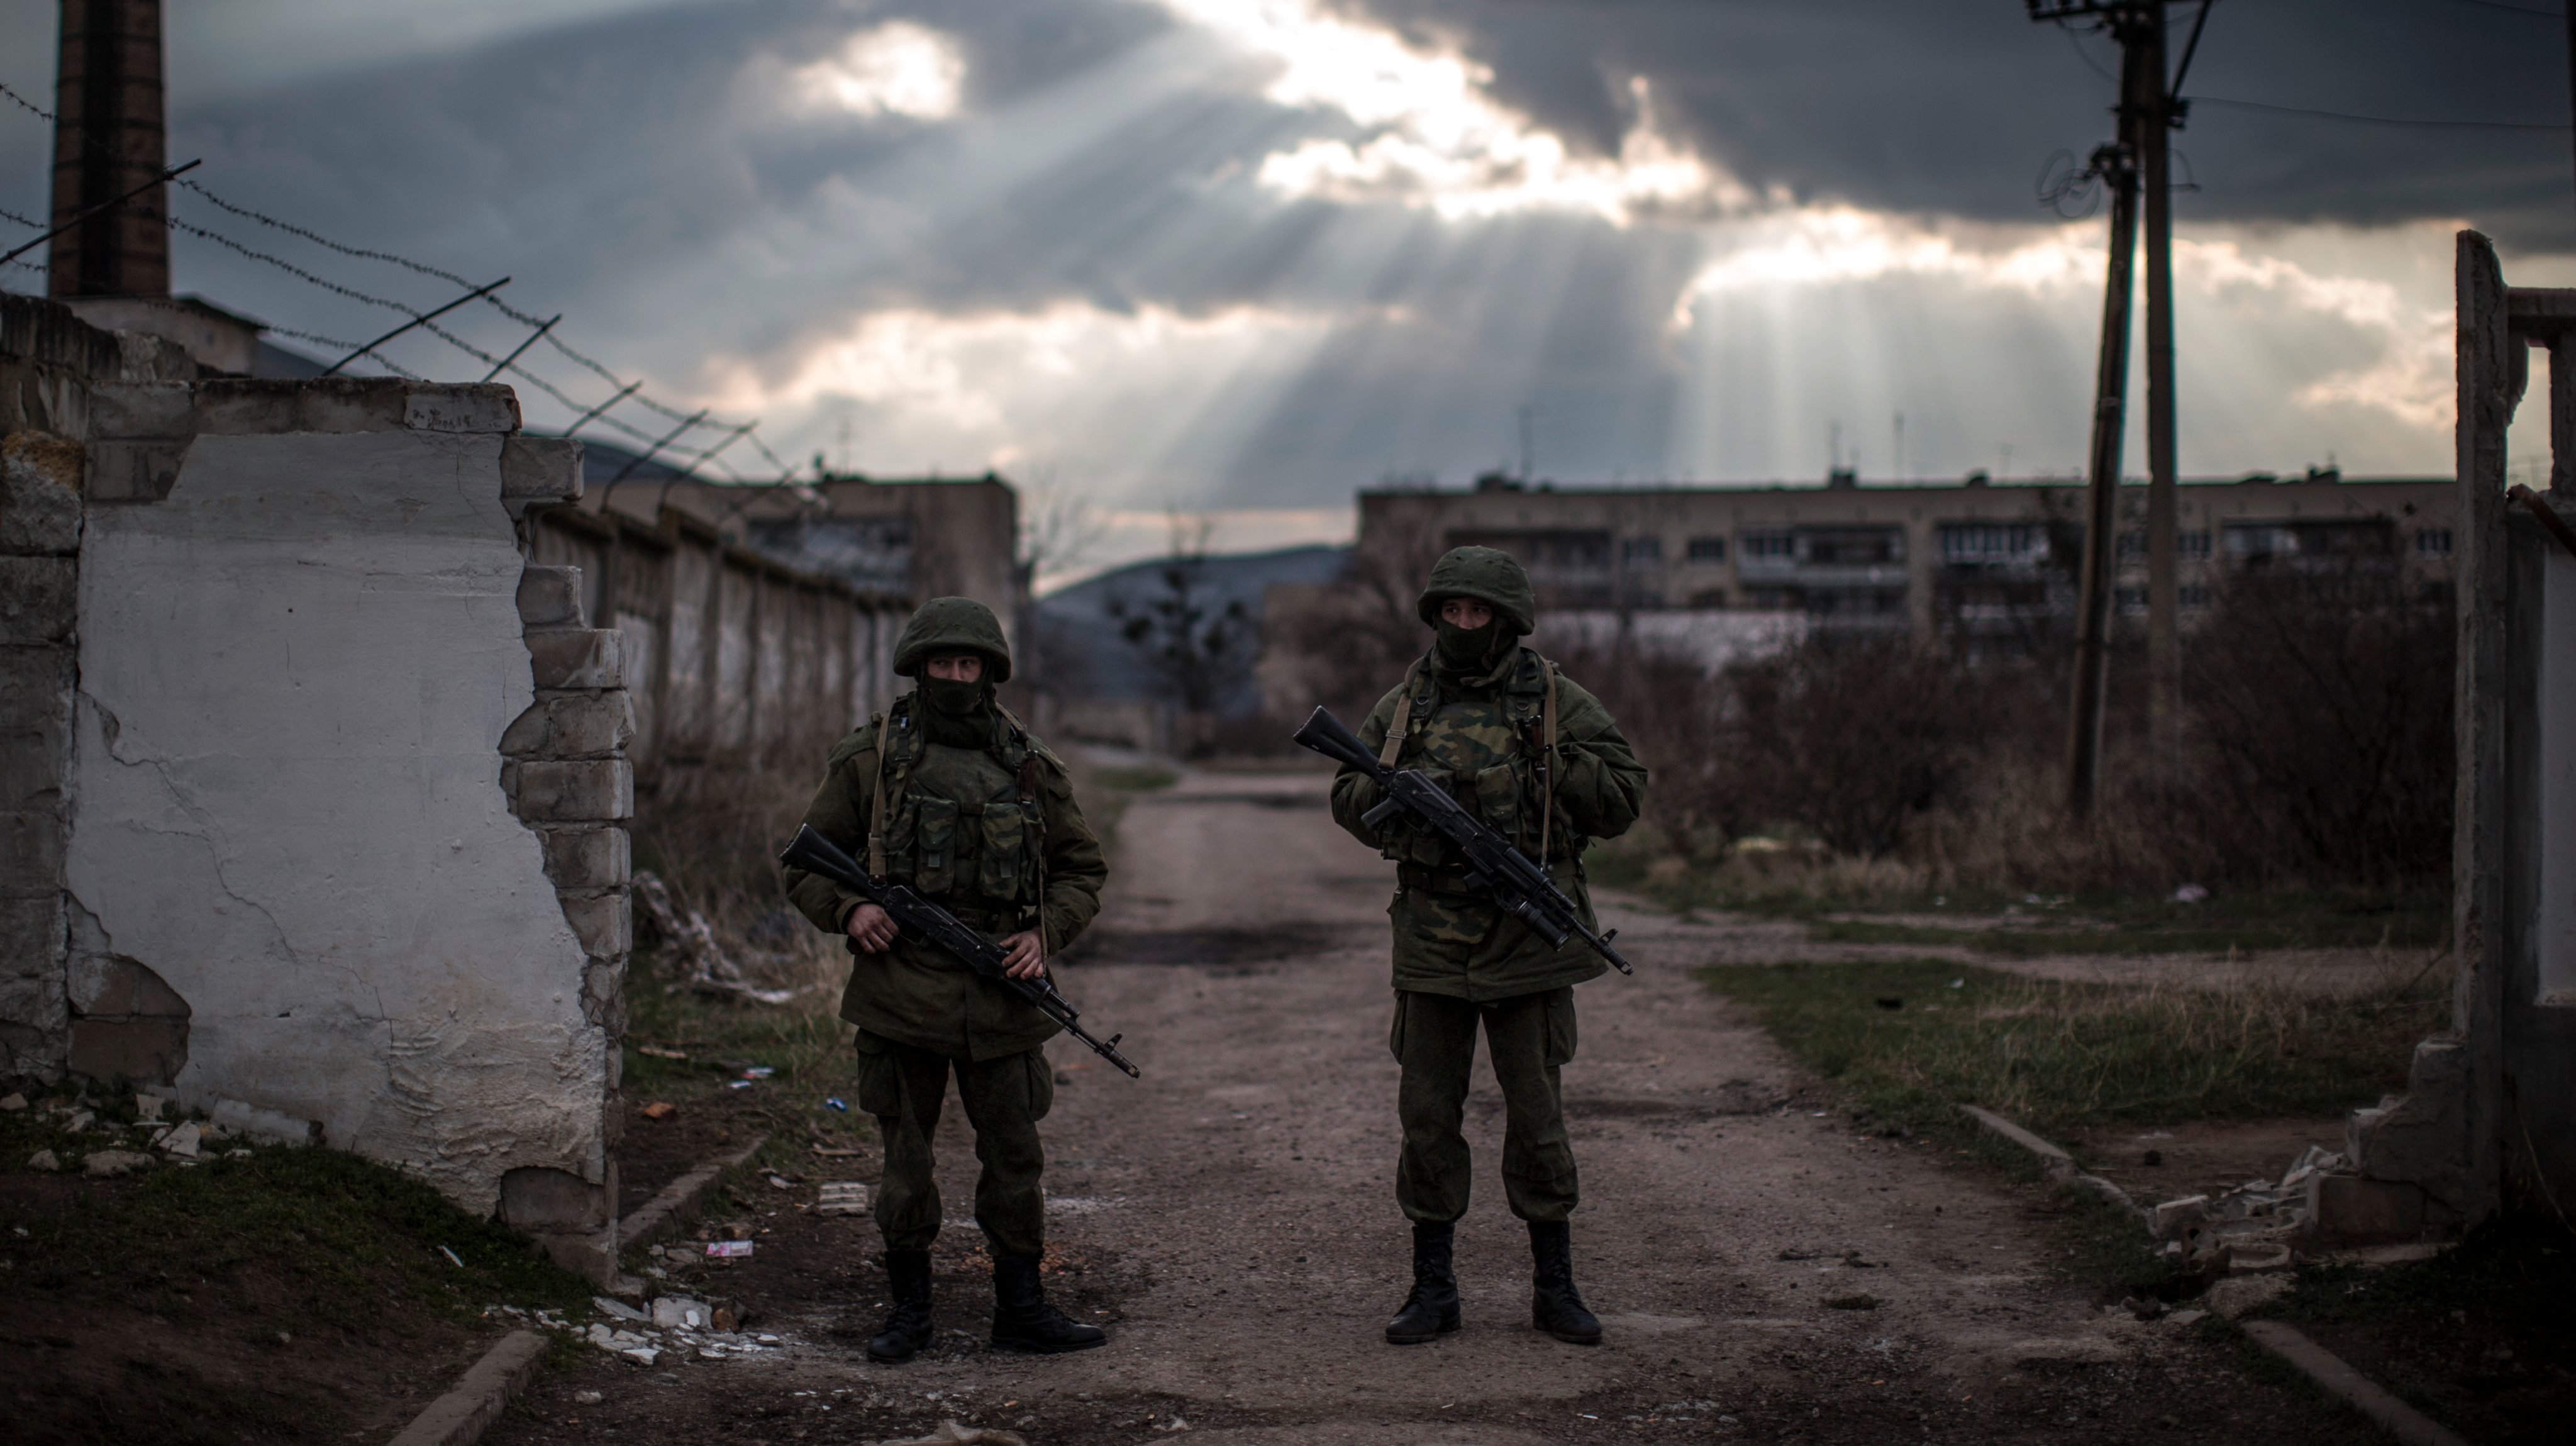 Tensions Grow In Crimea As Diplomatic Talks Continue